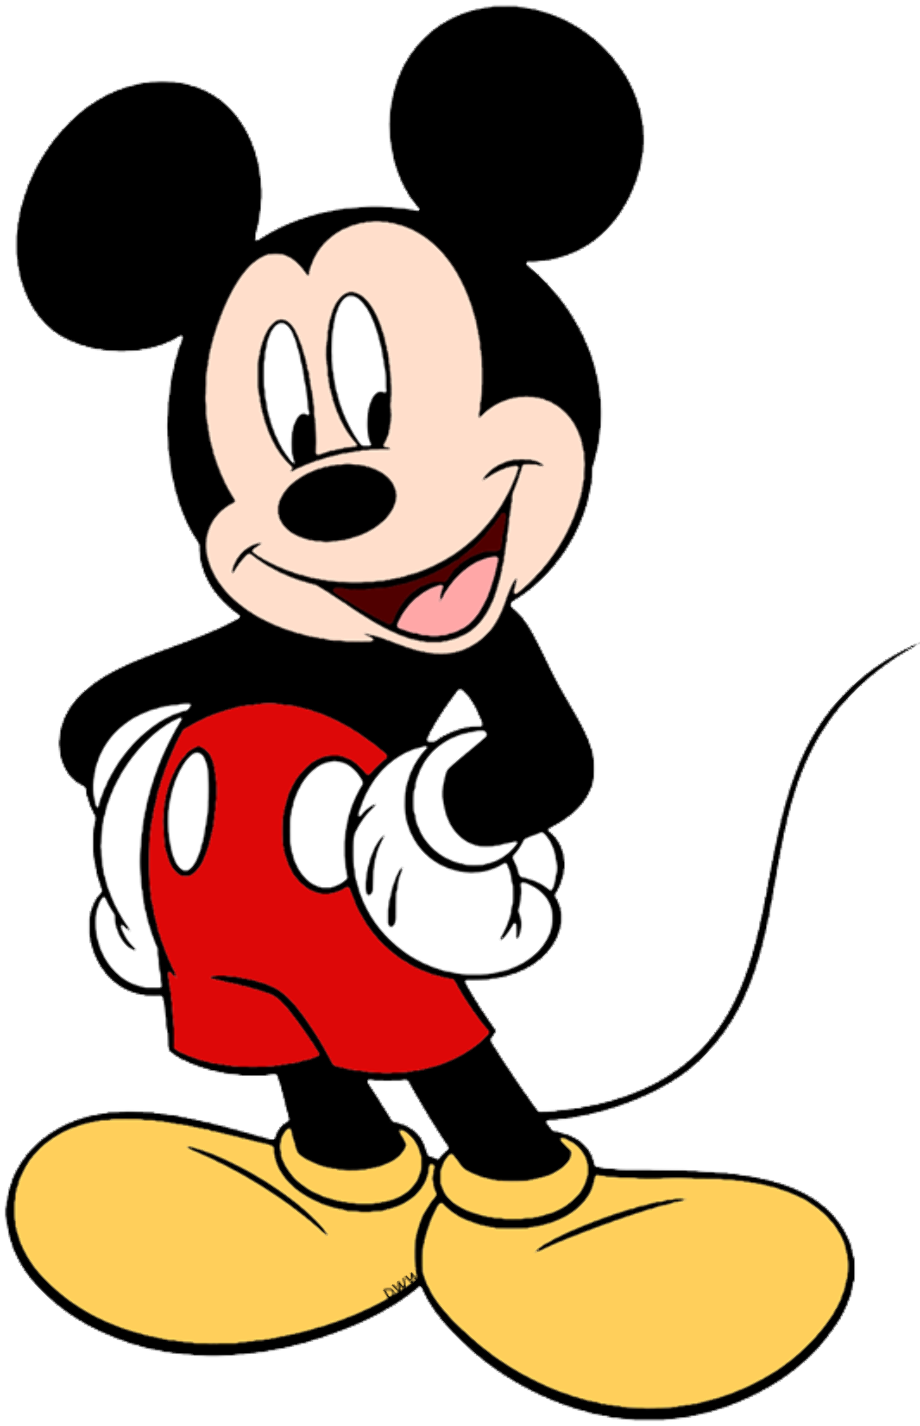 Download High Quality mickey mouse clipart Transparent PNG Images - Art